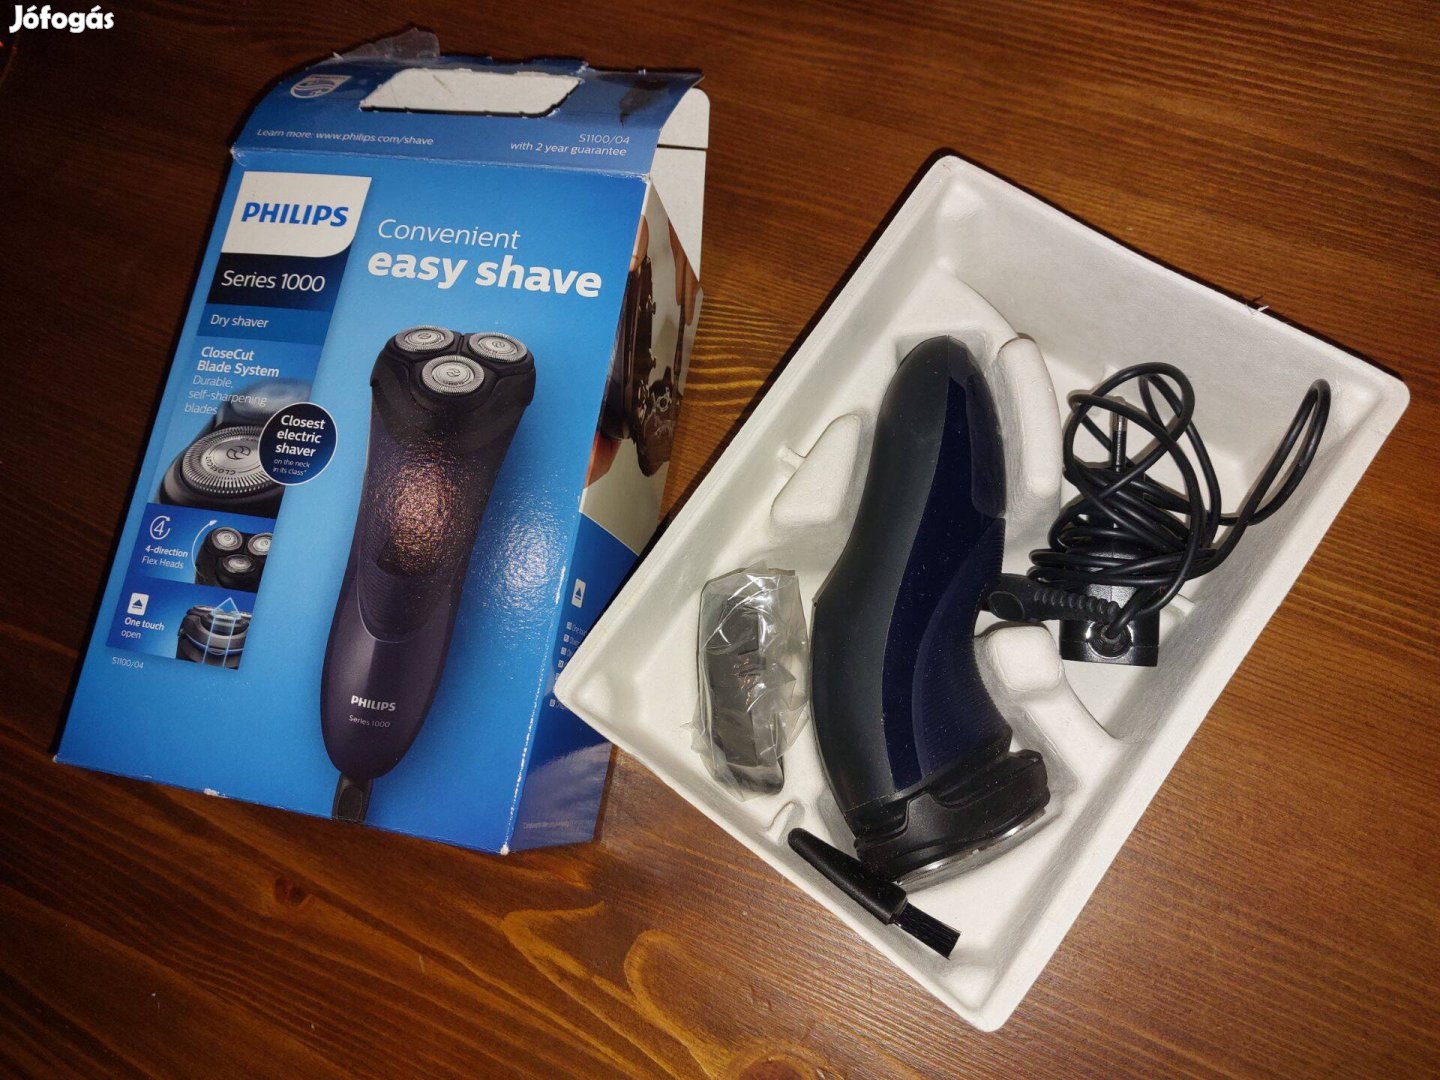 Philips Series 1000 easy shave